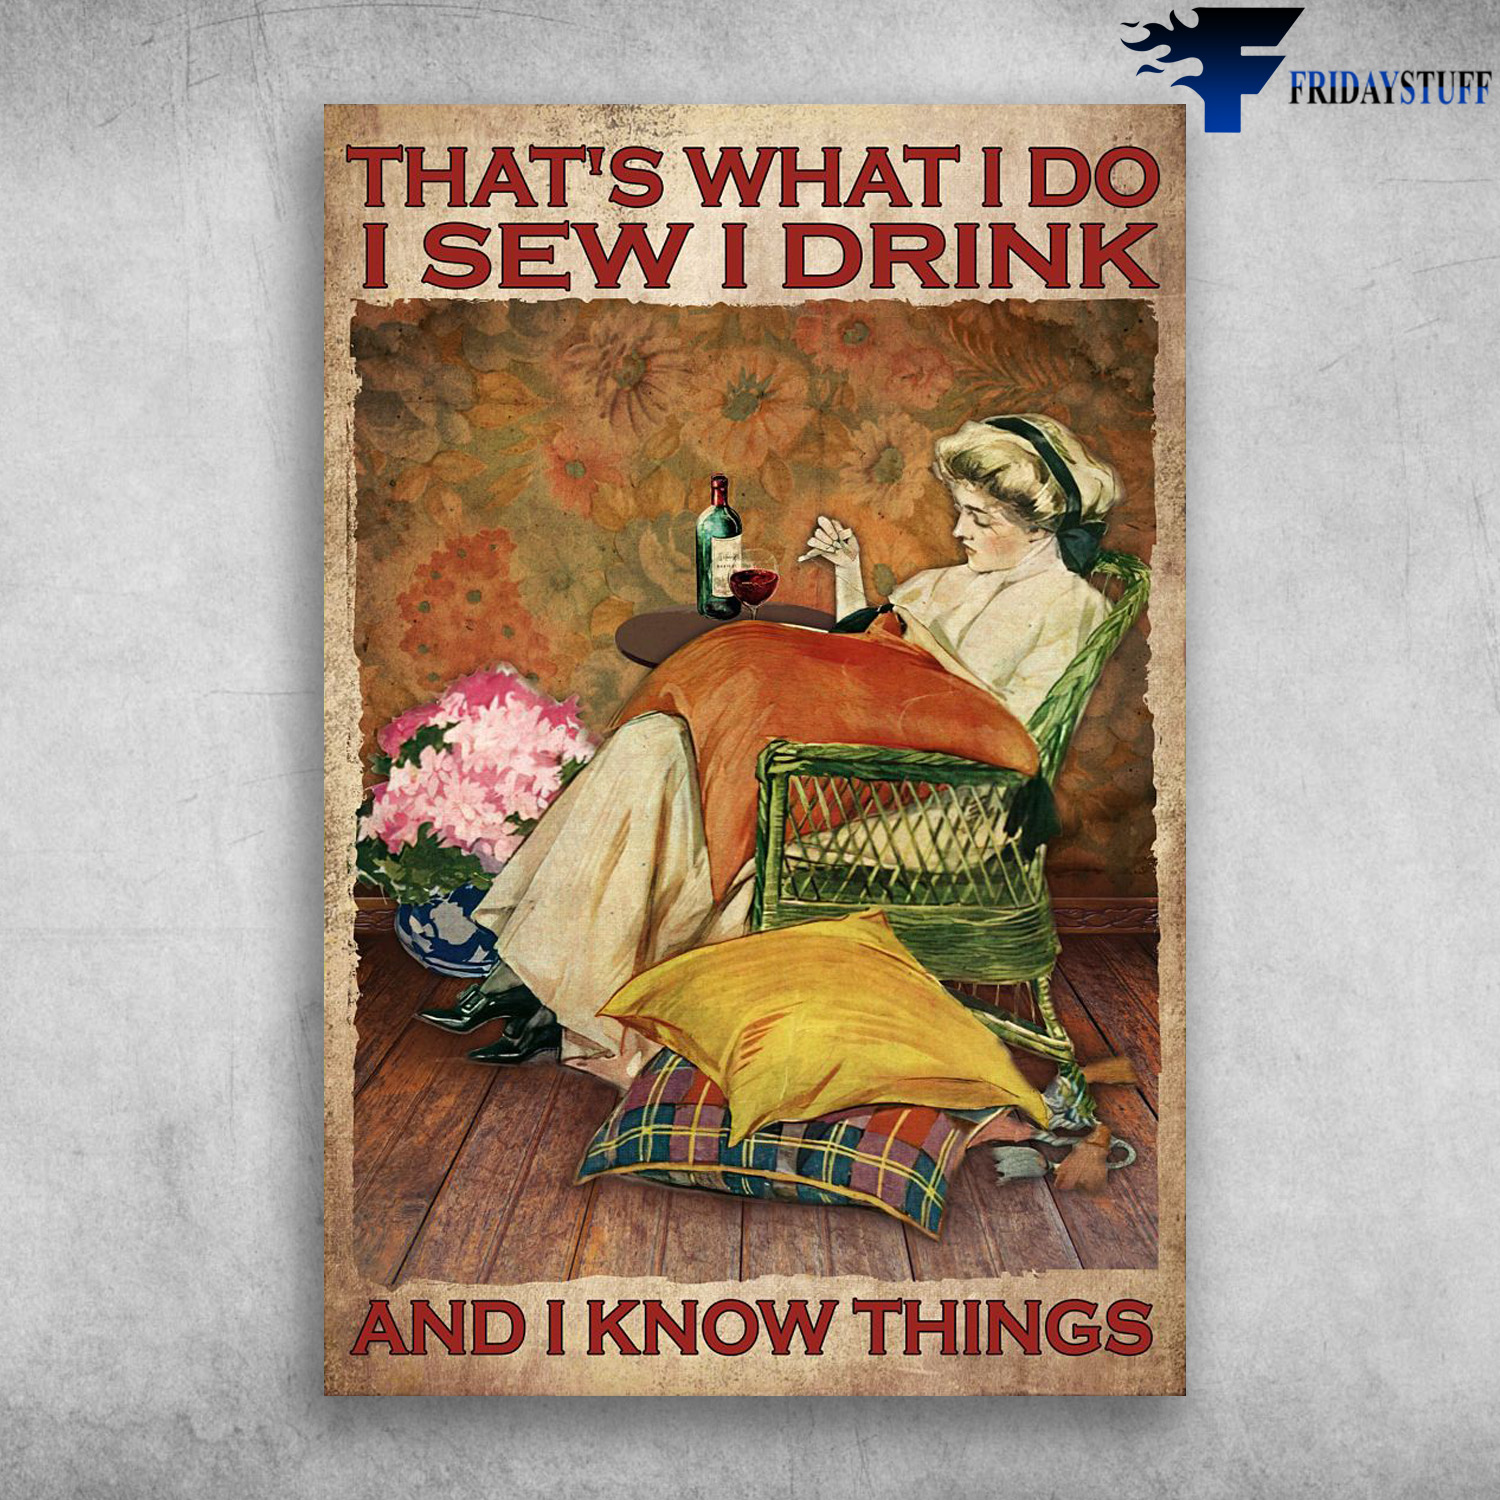 Girl Sewing And Drinking - That's What I Do, I Sew, I Drink, And I Know Things, Wine, Drink Woman, Gift For Mother's Day